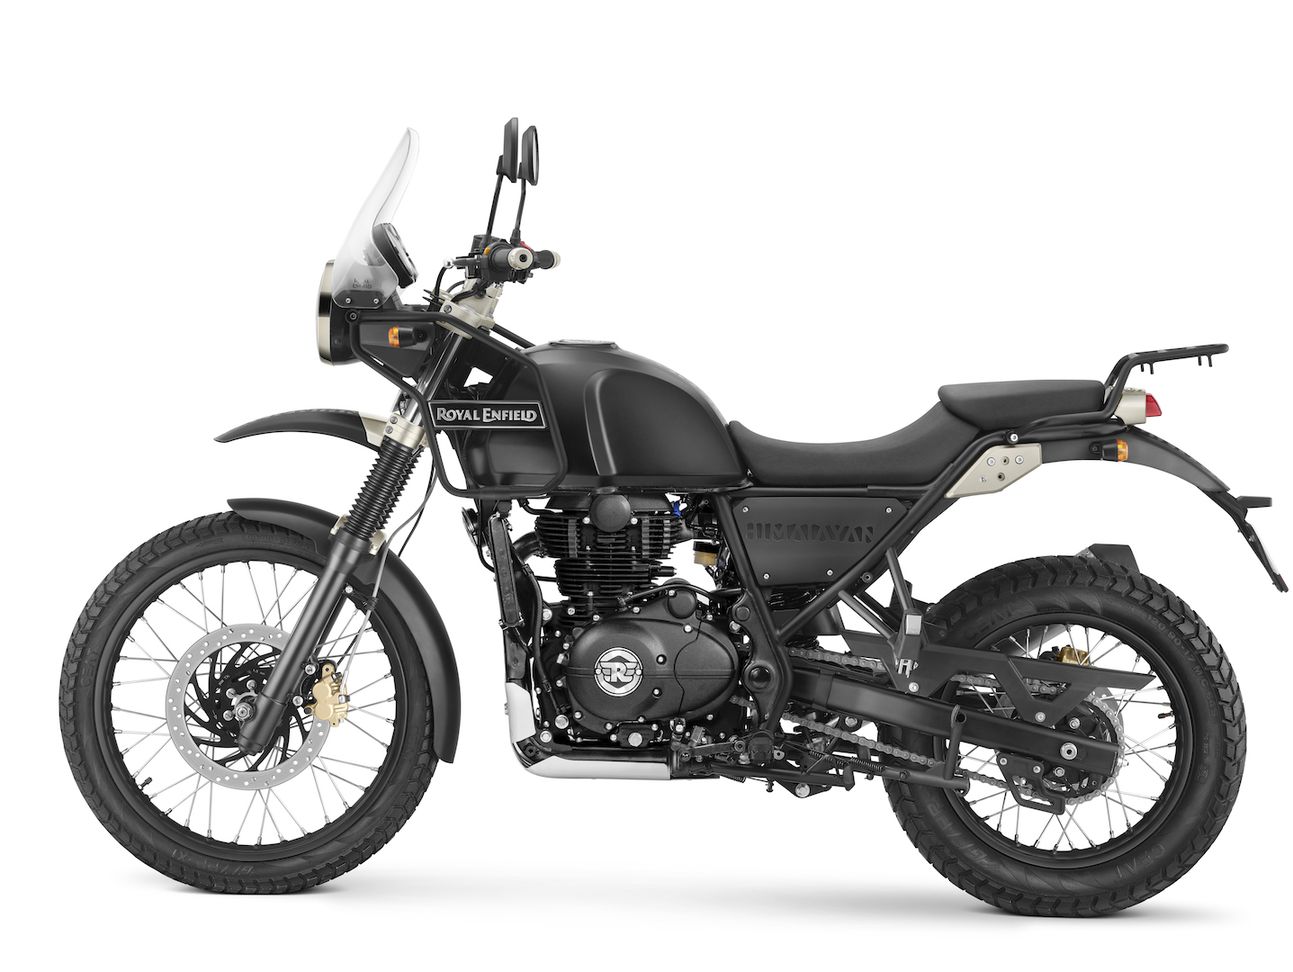 Royal Enfield Gave Its Nerdy Himalayan A Flat Track Makeover And Now It’s Ready To Win Prom Queen